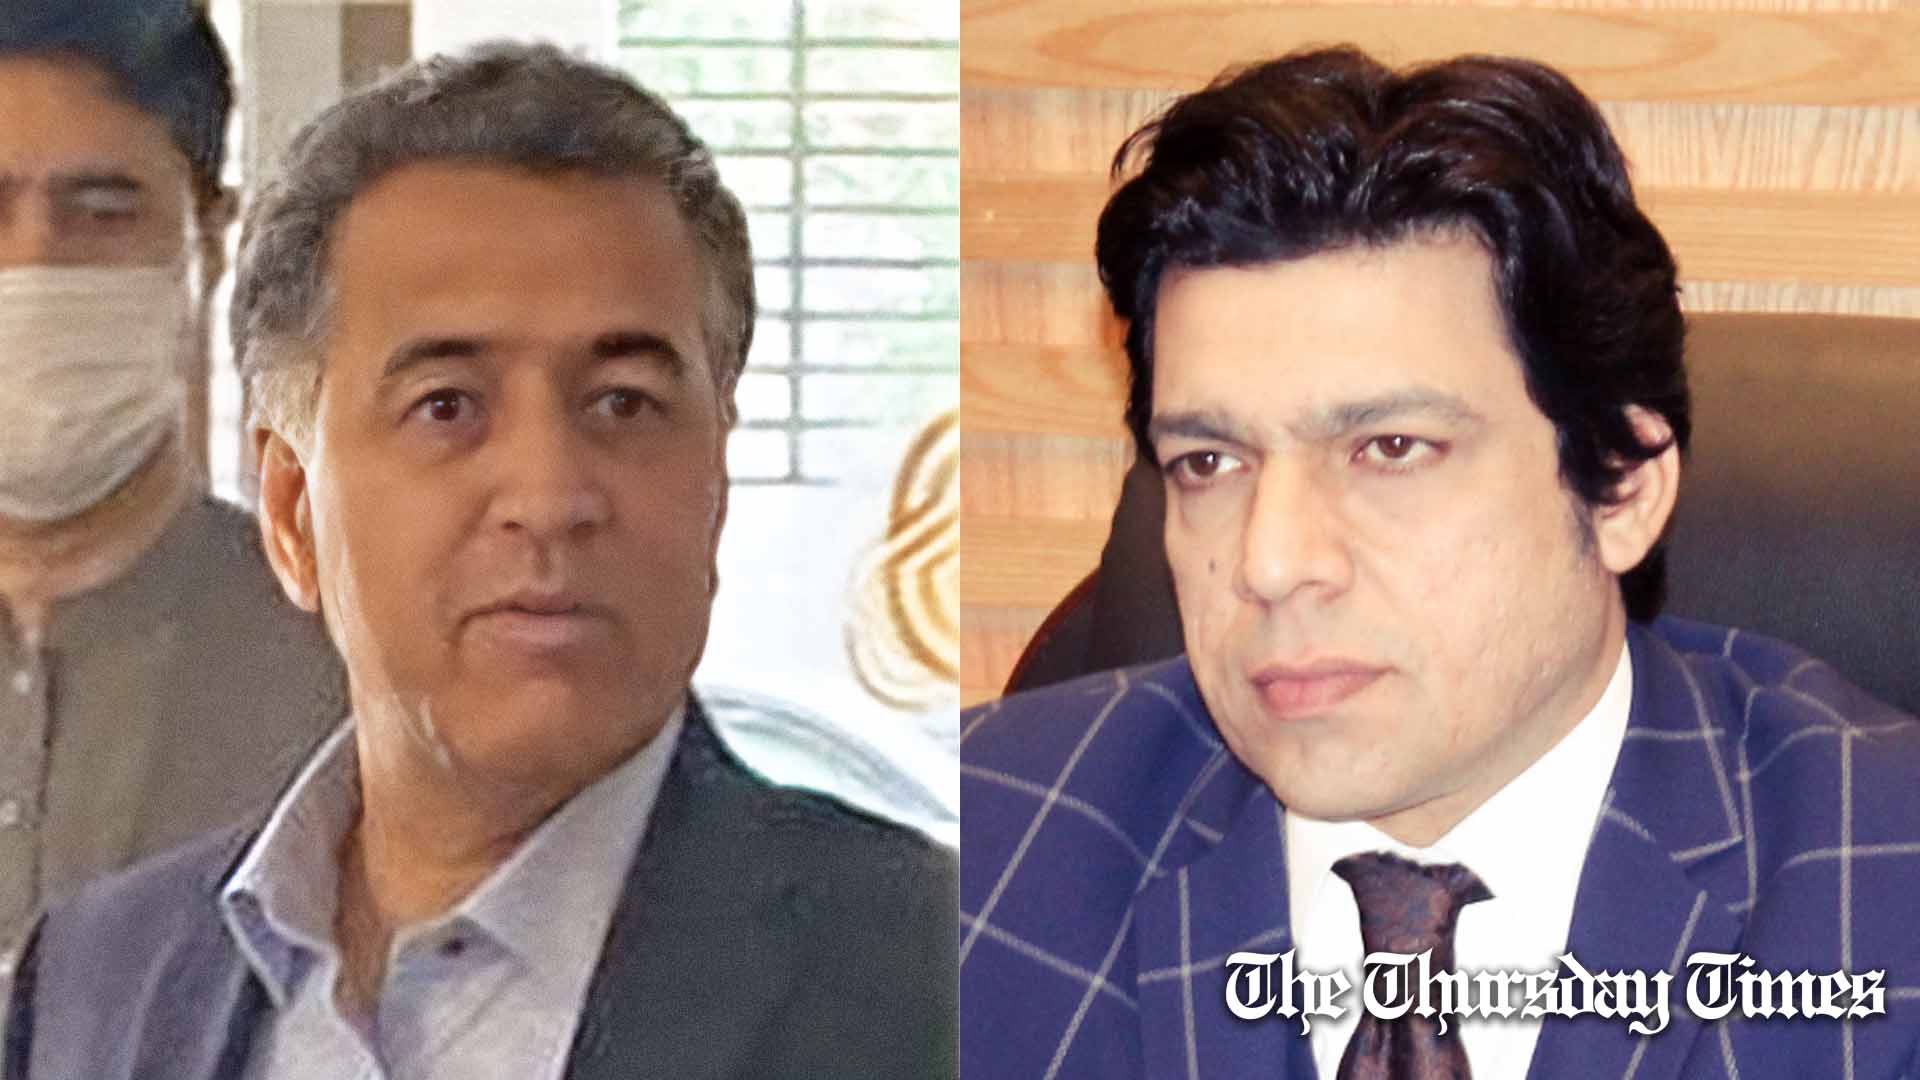 A file photo is shown of former ISI chief Faiz Hameed (L) and former MNA Faisal Vawda (R). — FILE/THE THURSDAY TIMES